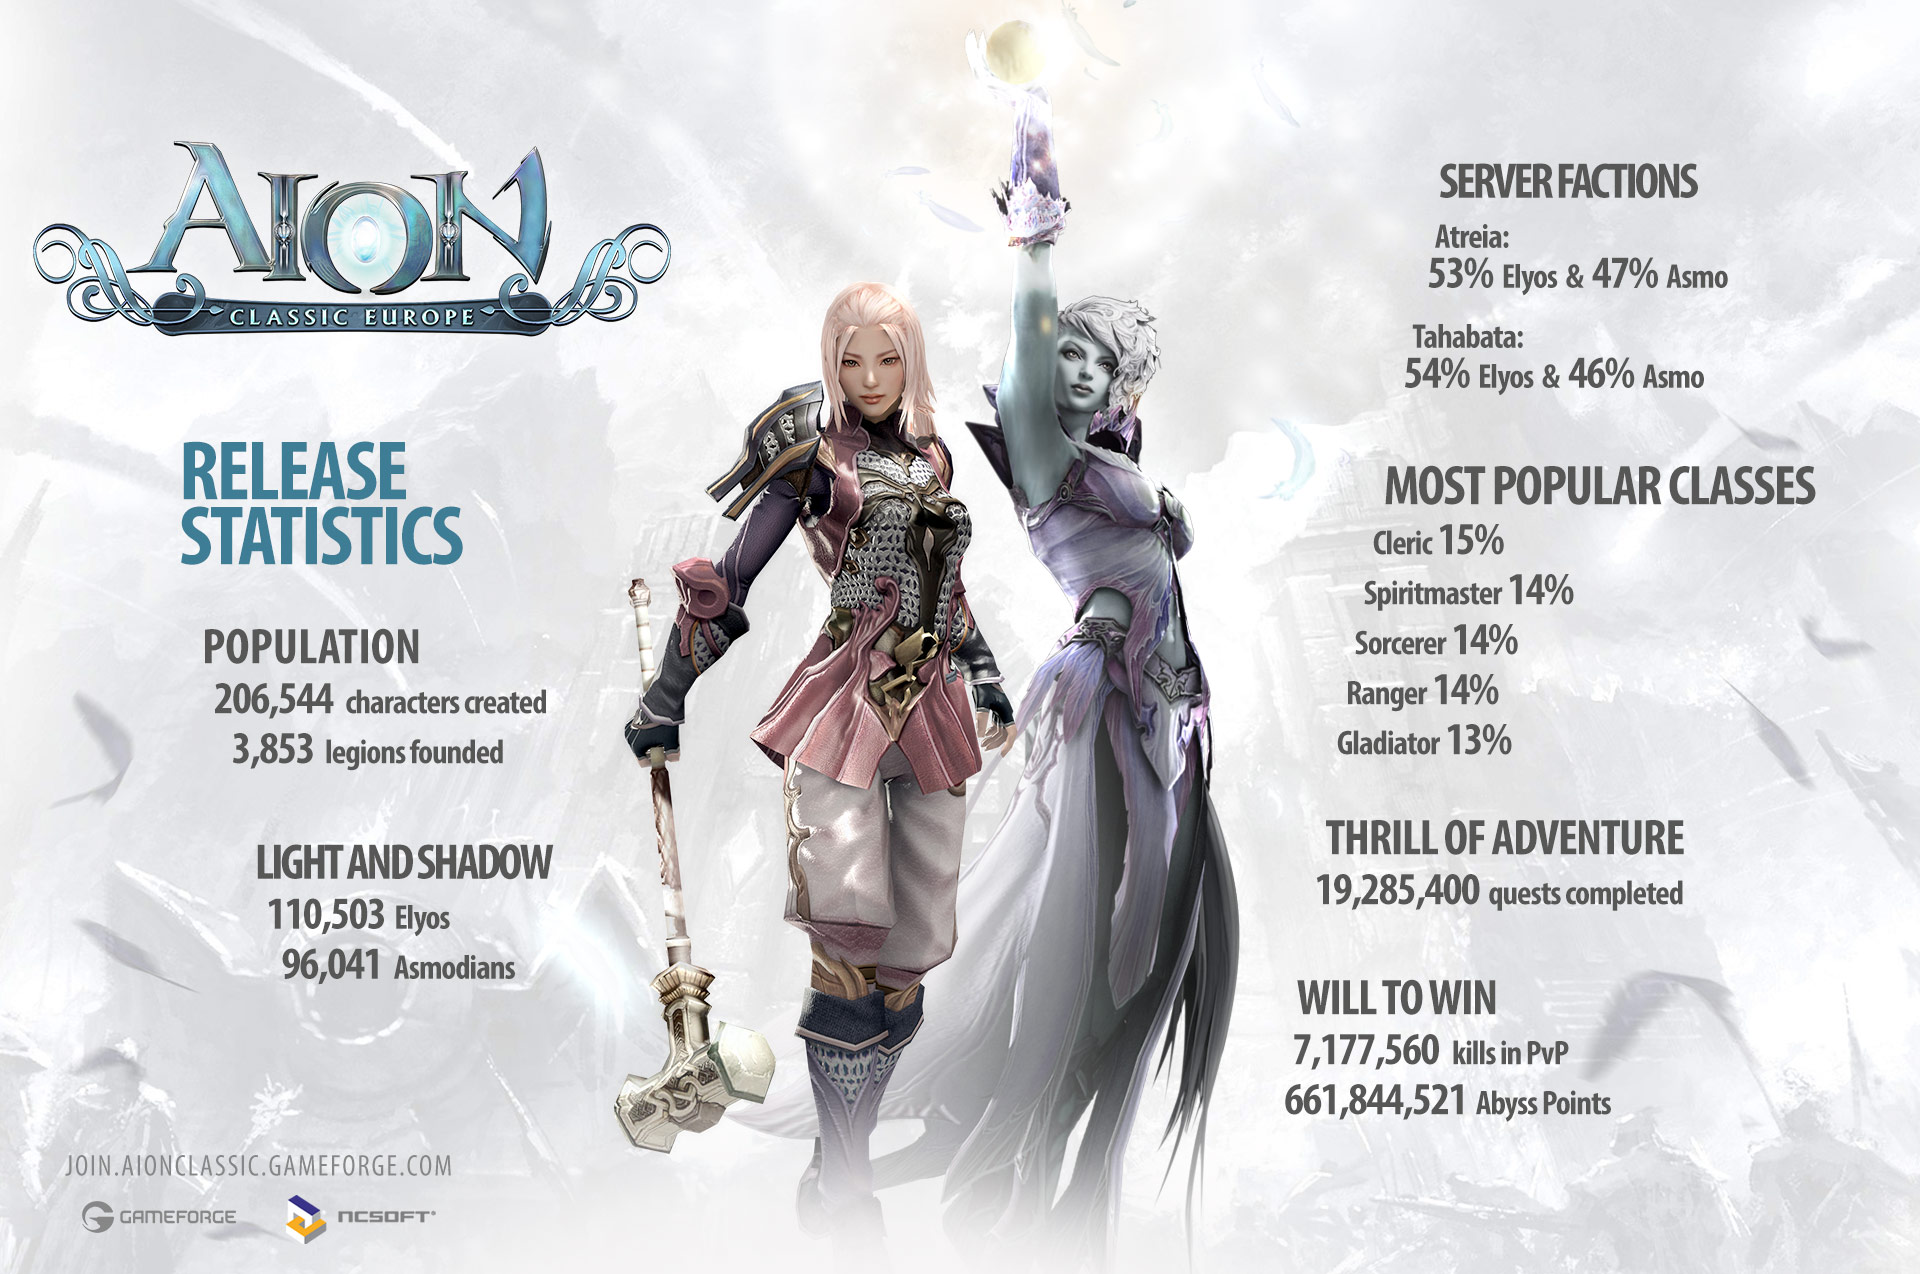 pave Citere klint Aion Classic EU maps out the rest of 2023 while compensating players for  DDOS outages | Massively Overpowered